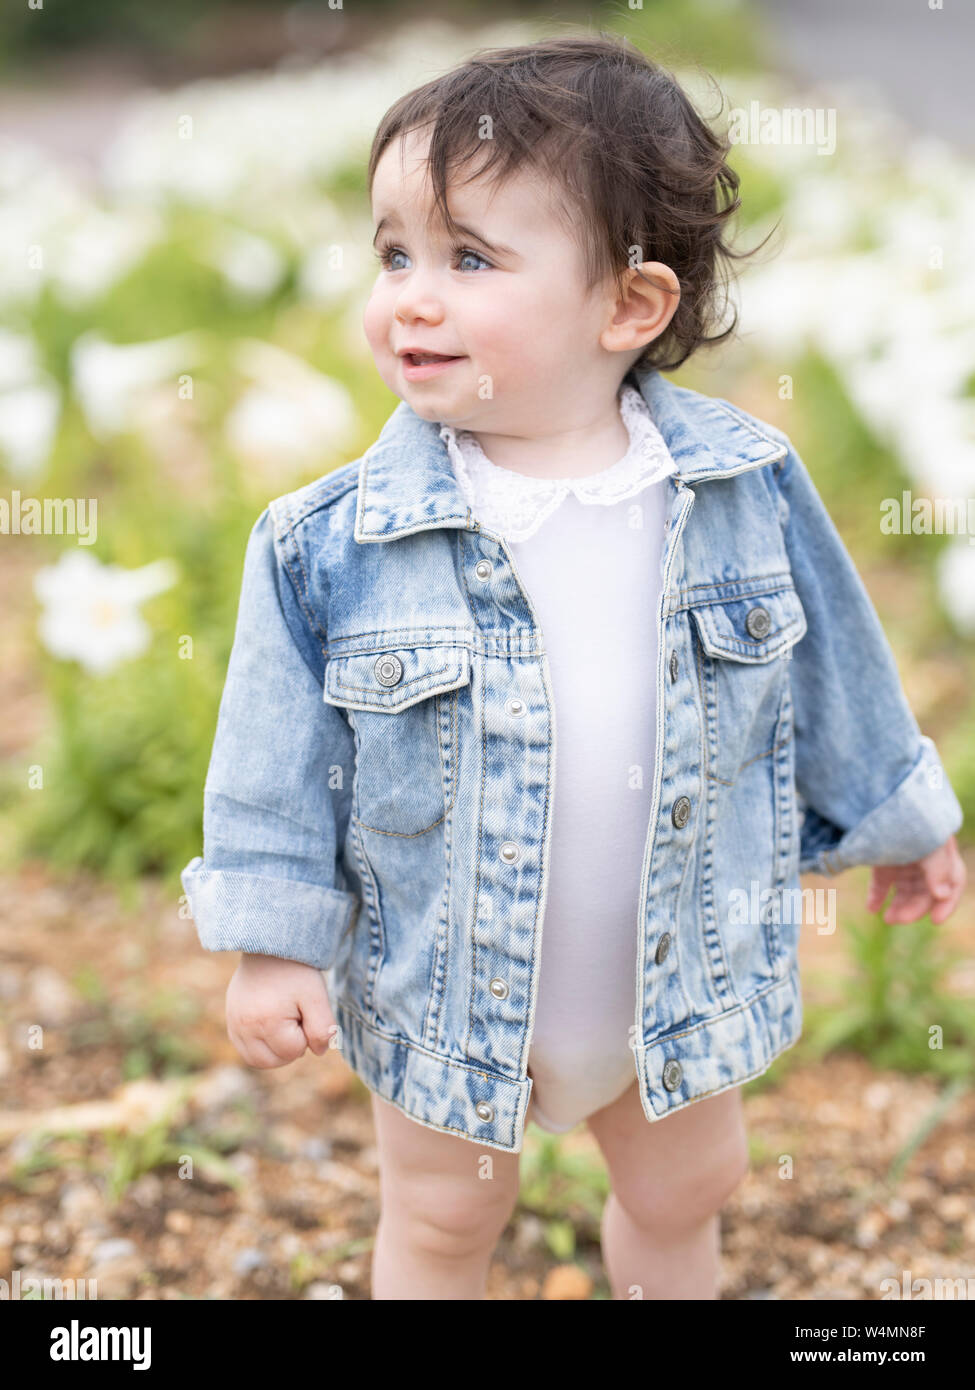 1-year-old toddler with denim jacket Stock Photo